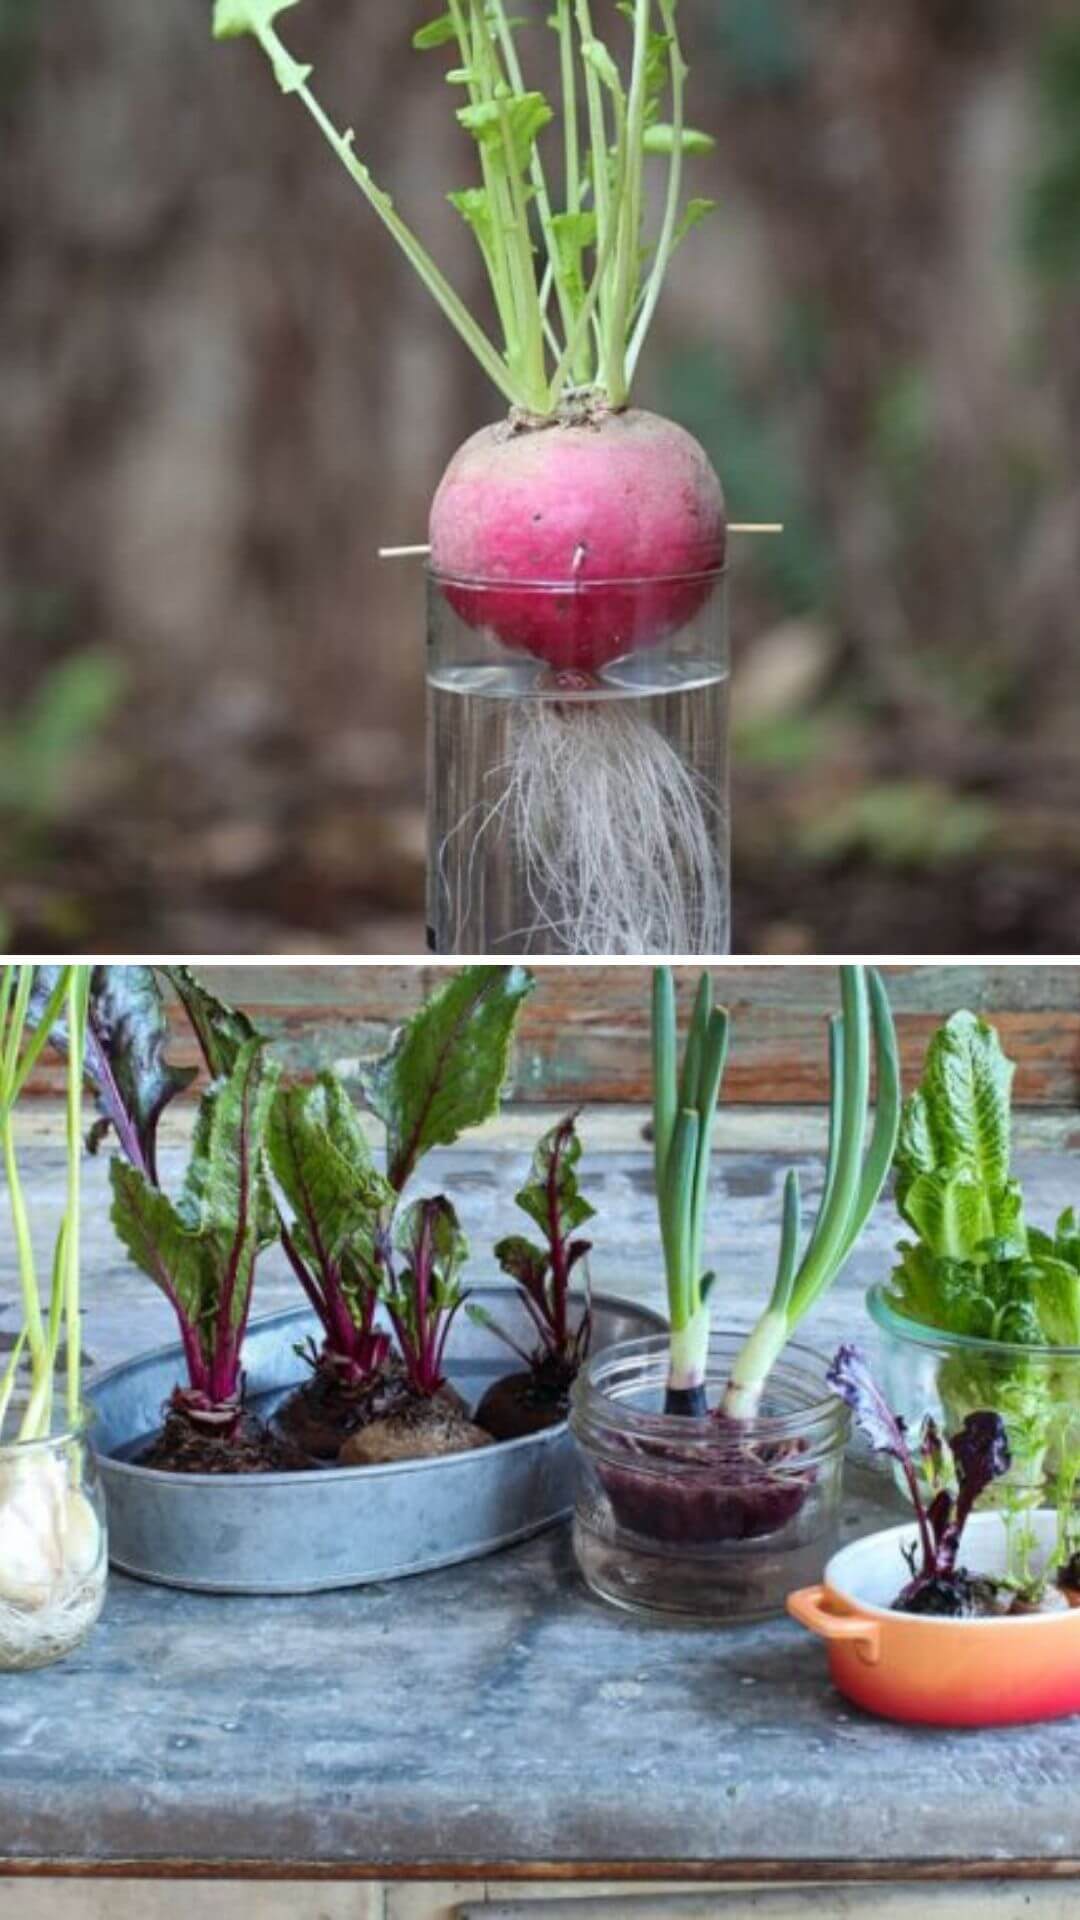 How to grow turnips from kitchen scraps